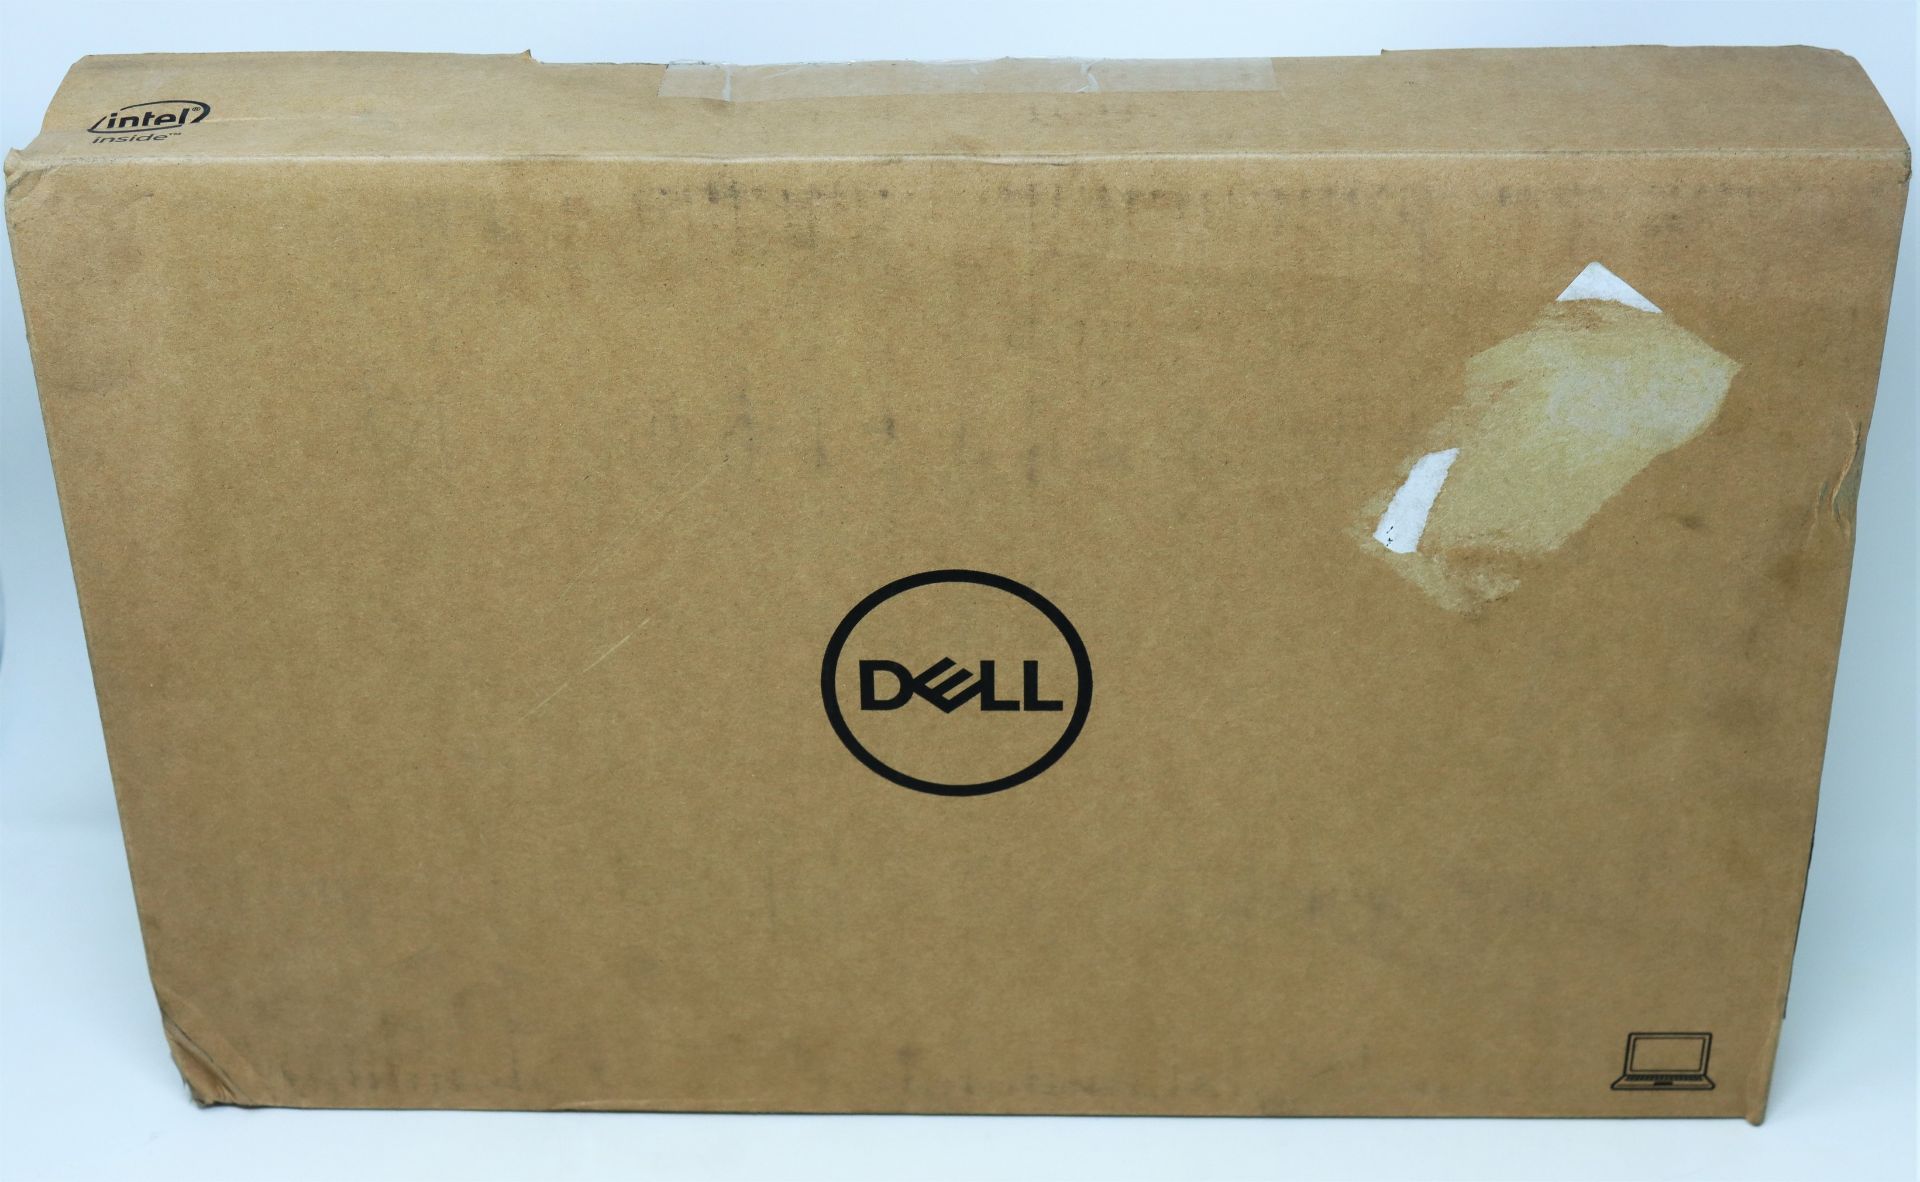 A boxed as new Dell Inspiron 15 3501 15.6" HD Laptop in Accent Black with Intel Core i3-1115G4